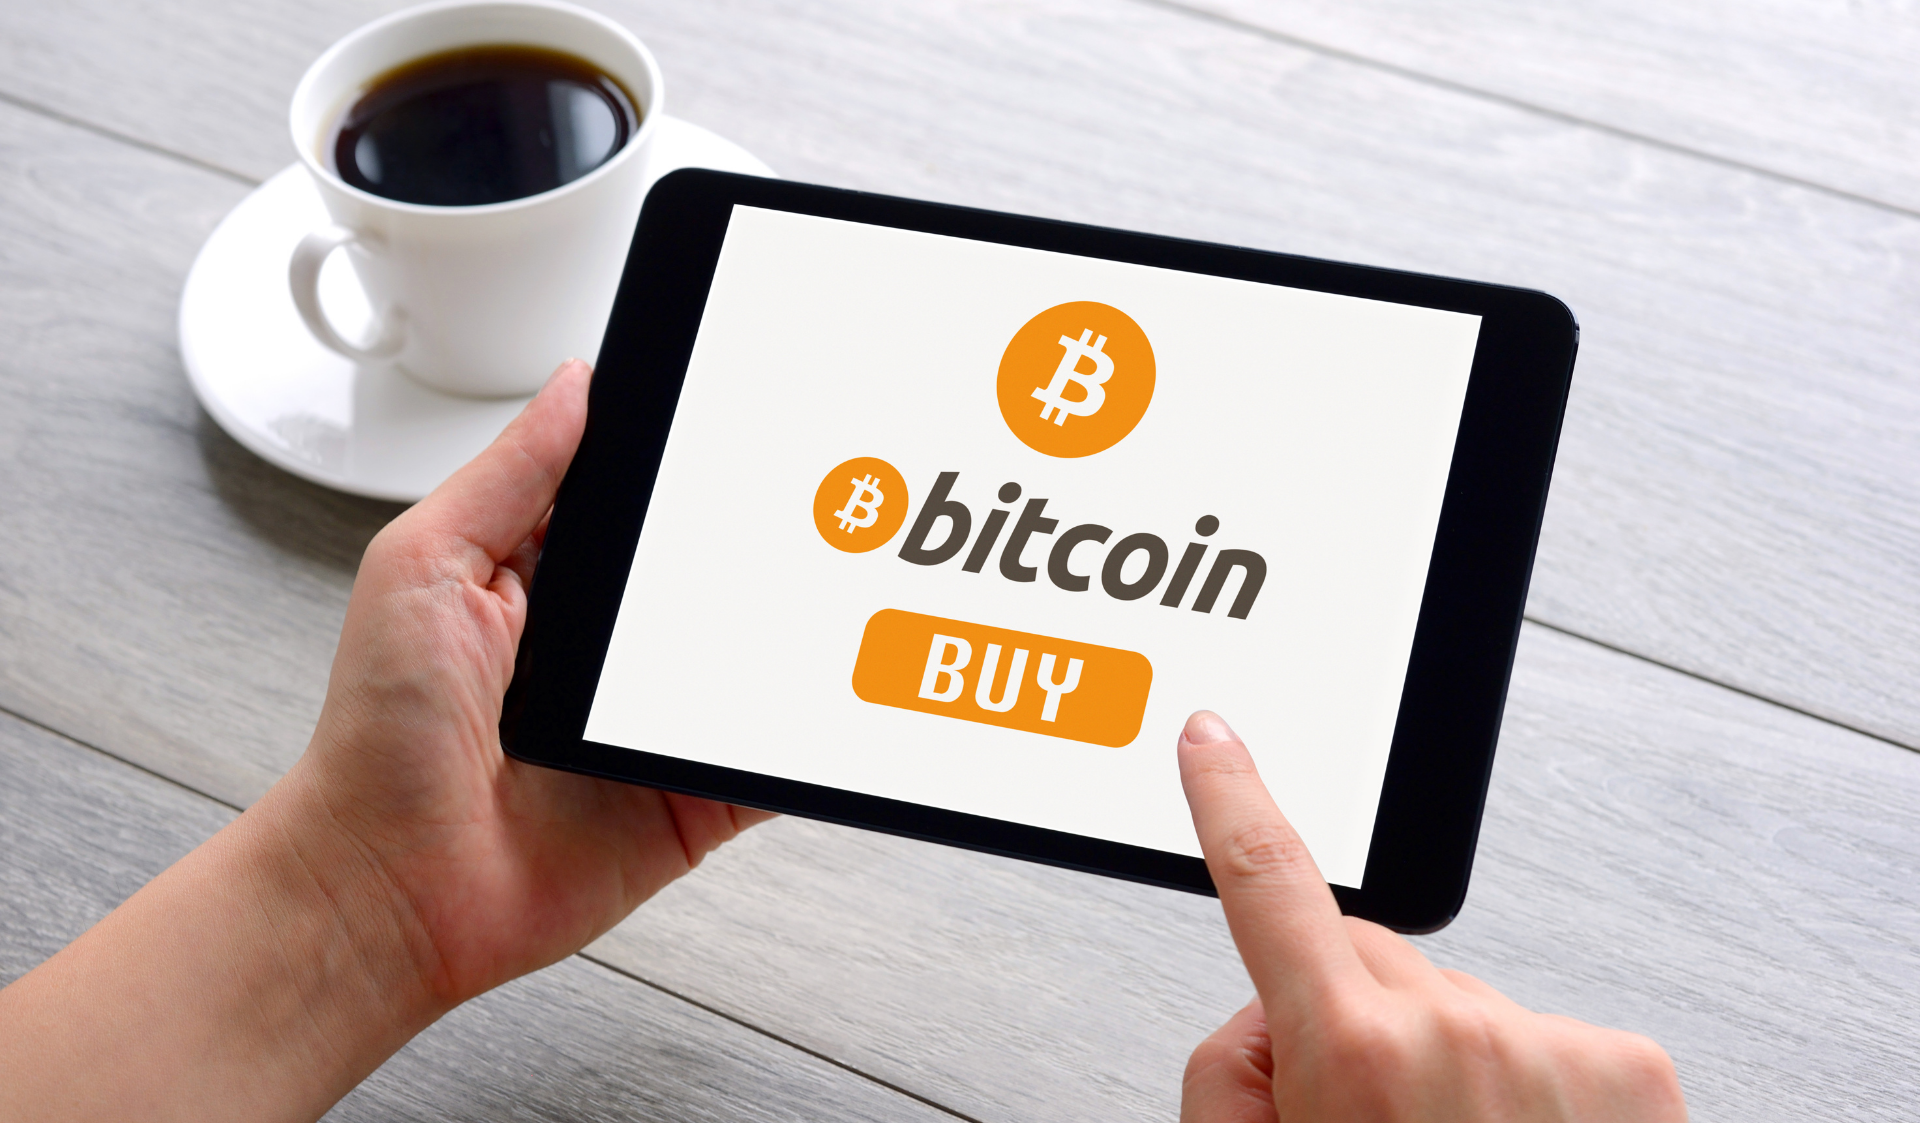 learn how to buy your first bitcoin with a virtual consultation